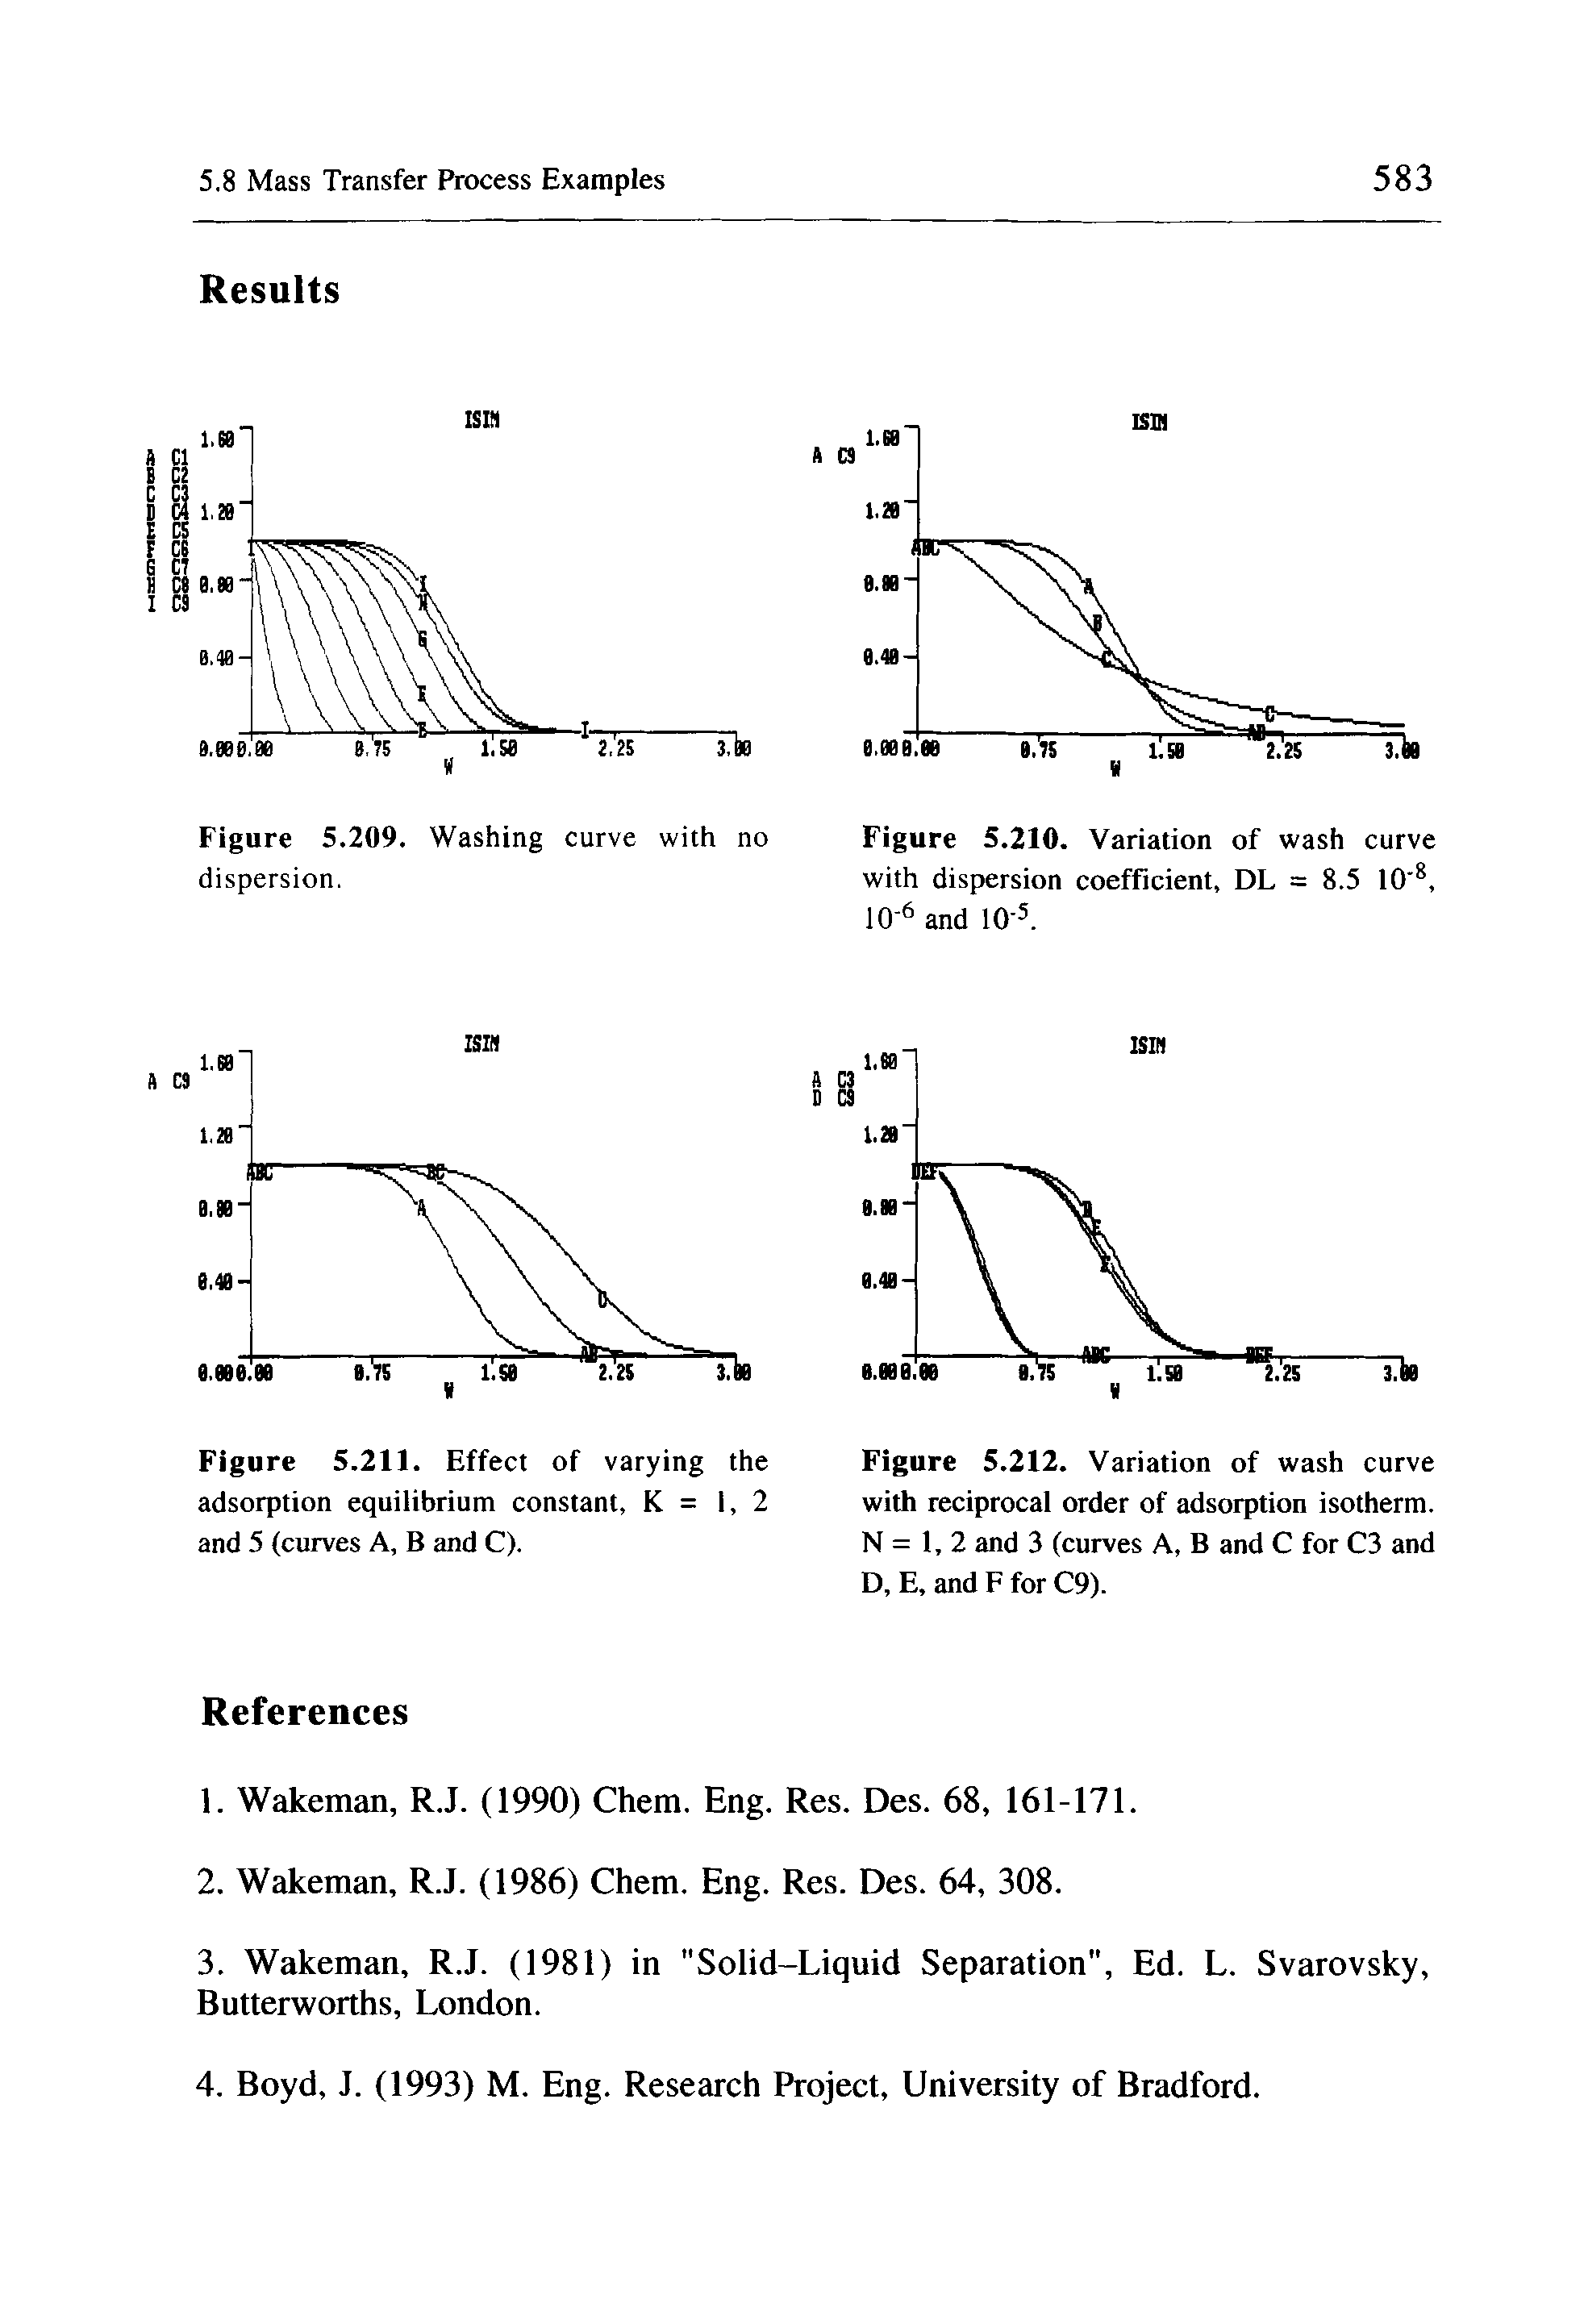 Figure 5.211. Effect of varying the adsorption equilibrium constant, K = 1, 2 and 5 (curves A, B and C).